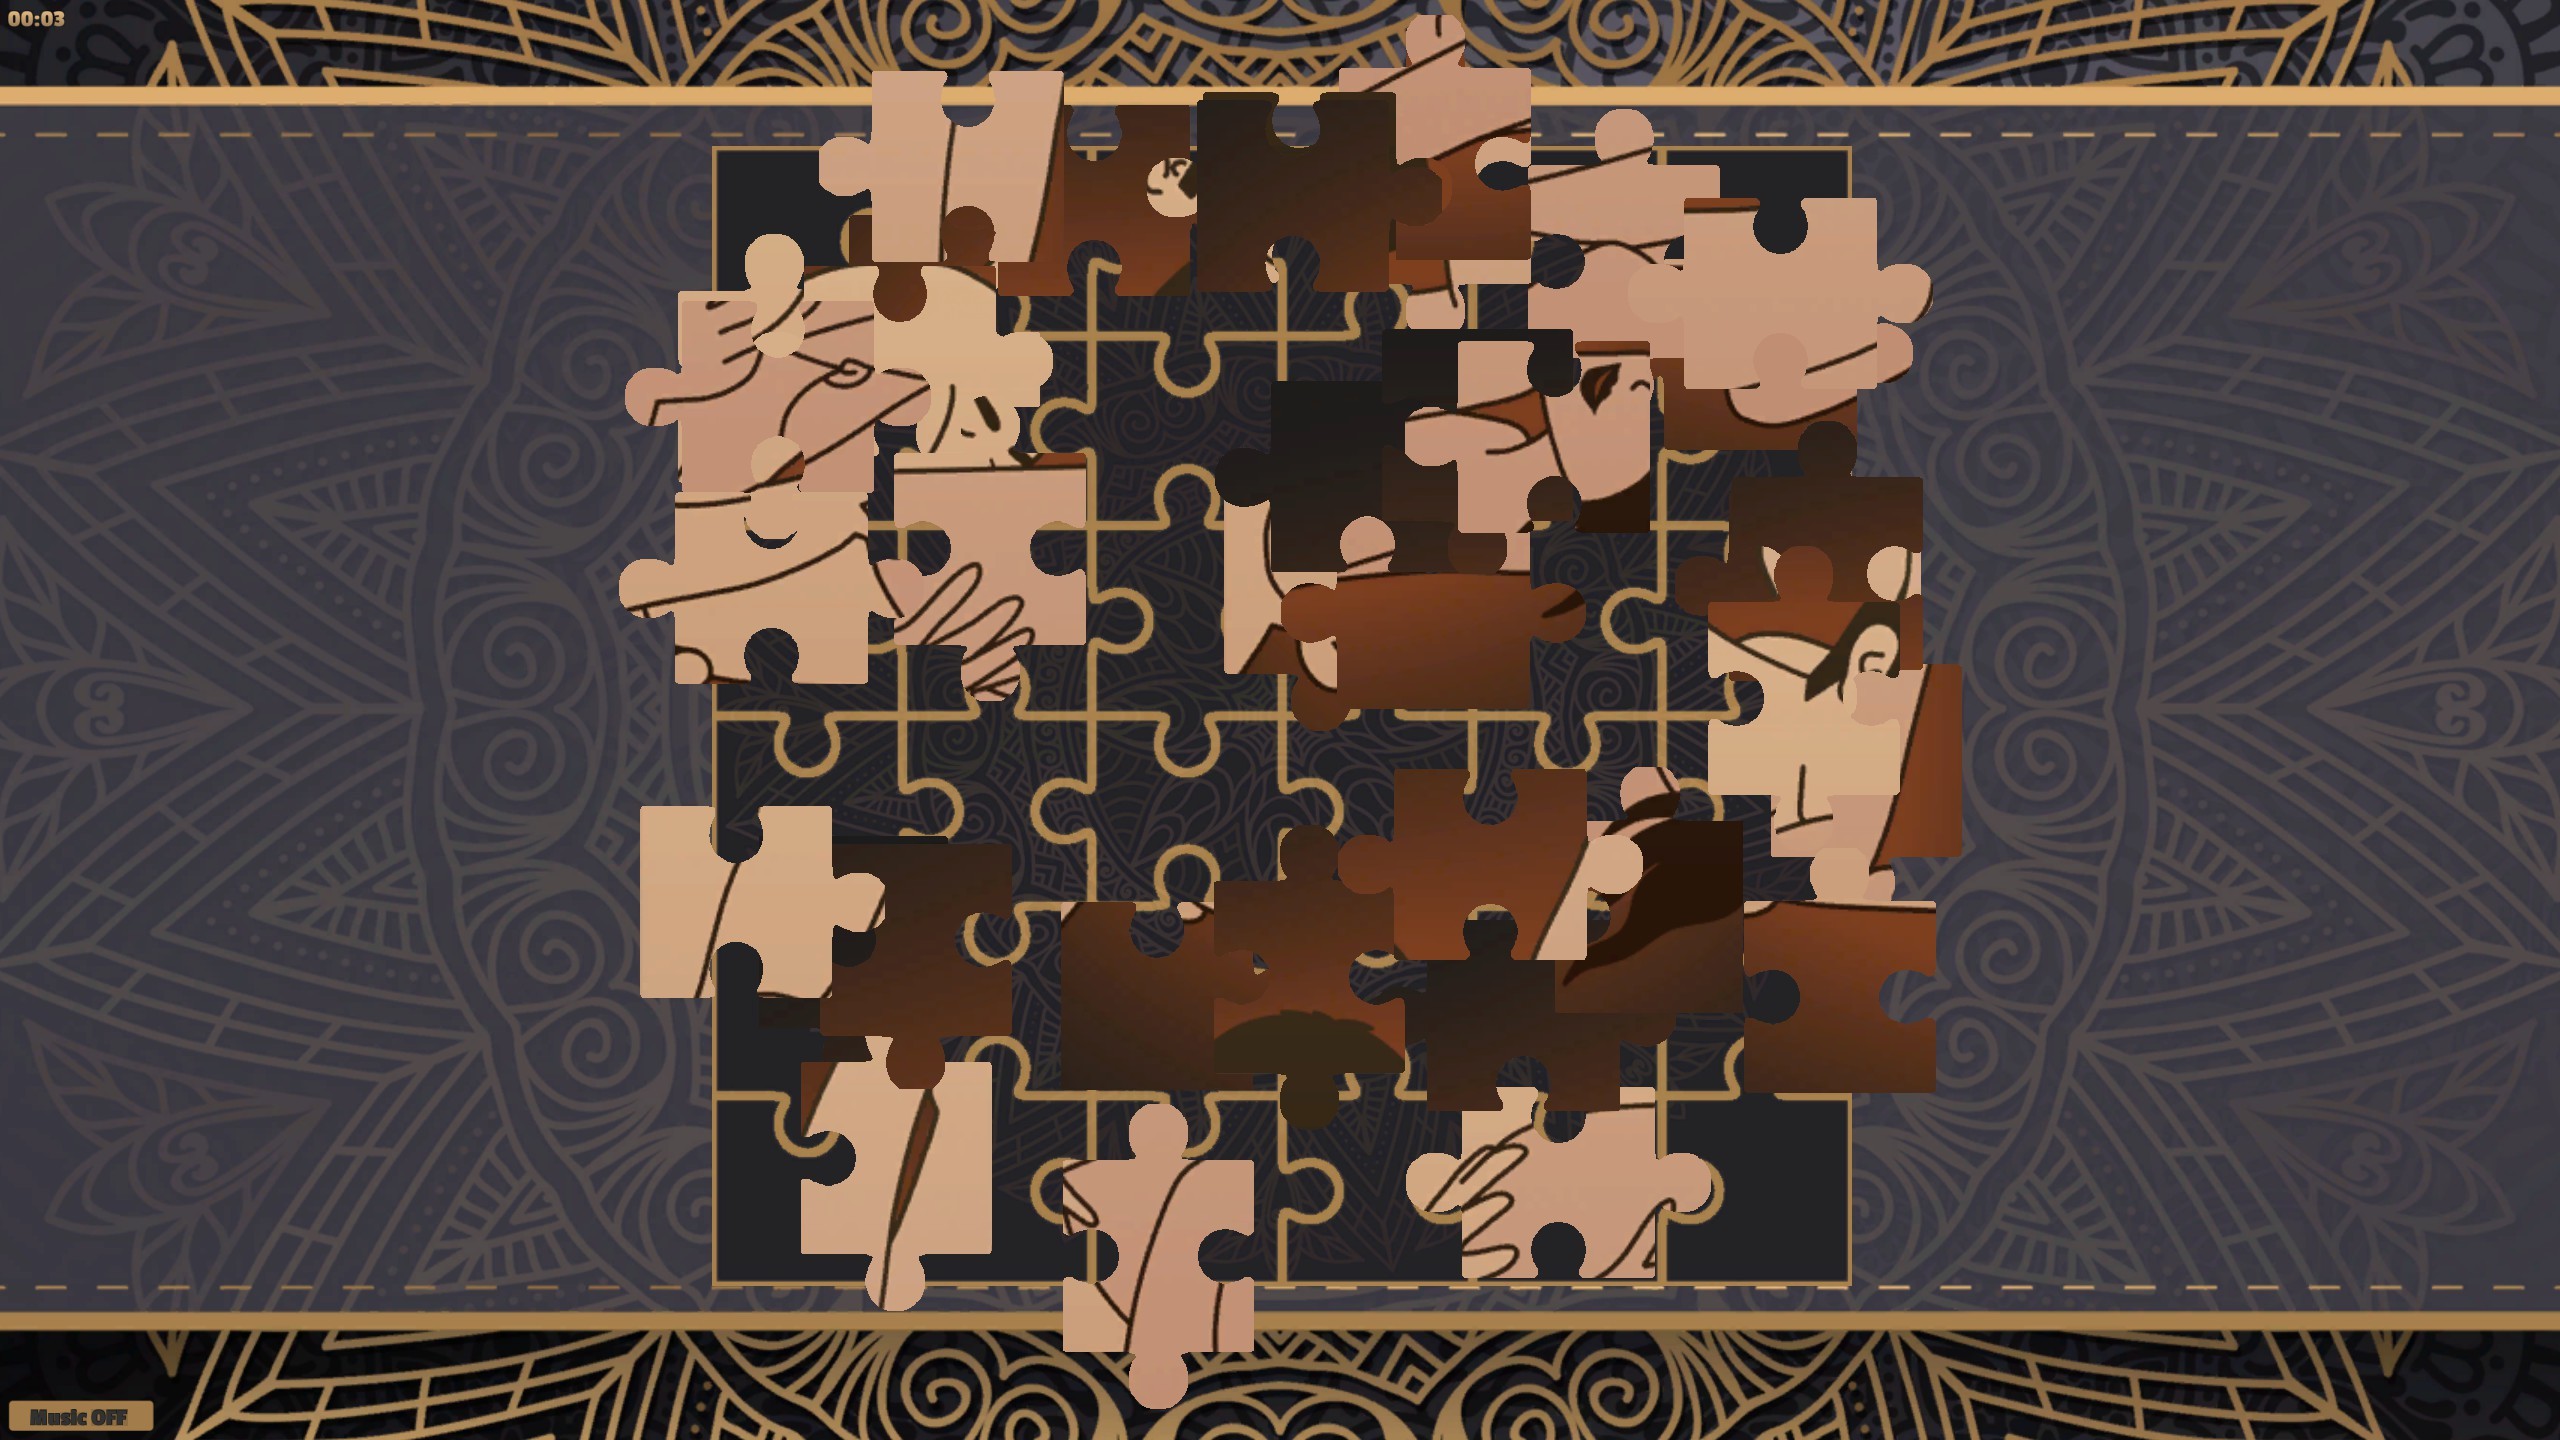 LineArt Jigsaw Puzzle - Erotica 5 Steam CD Key, $0.21